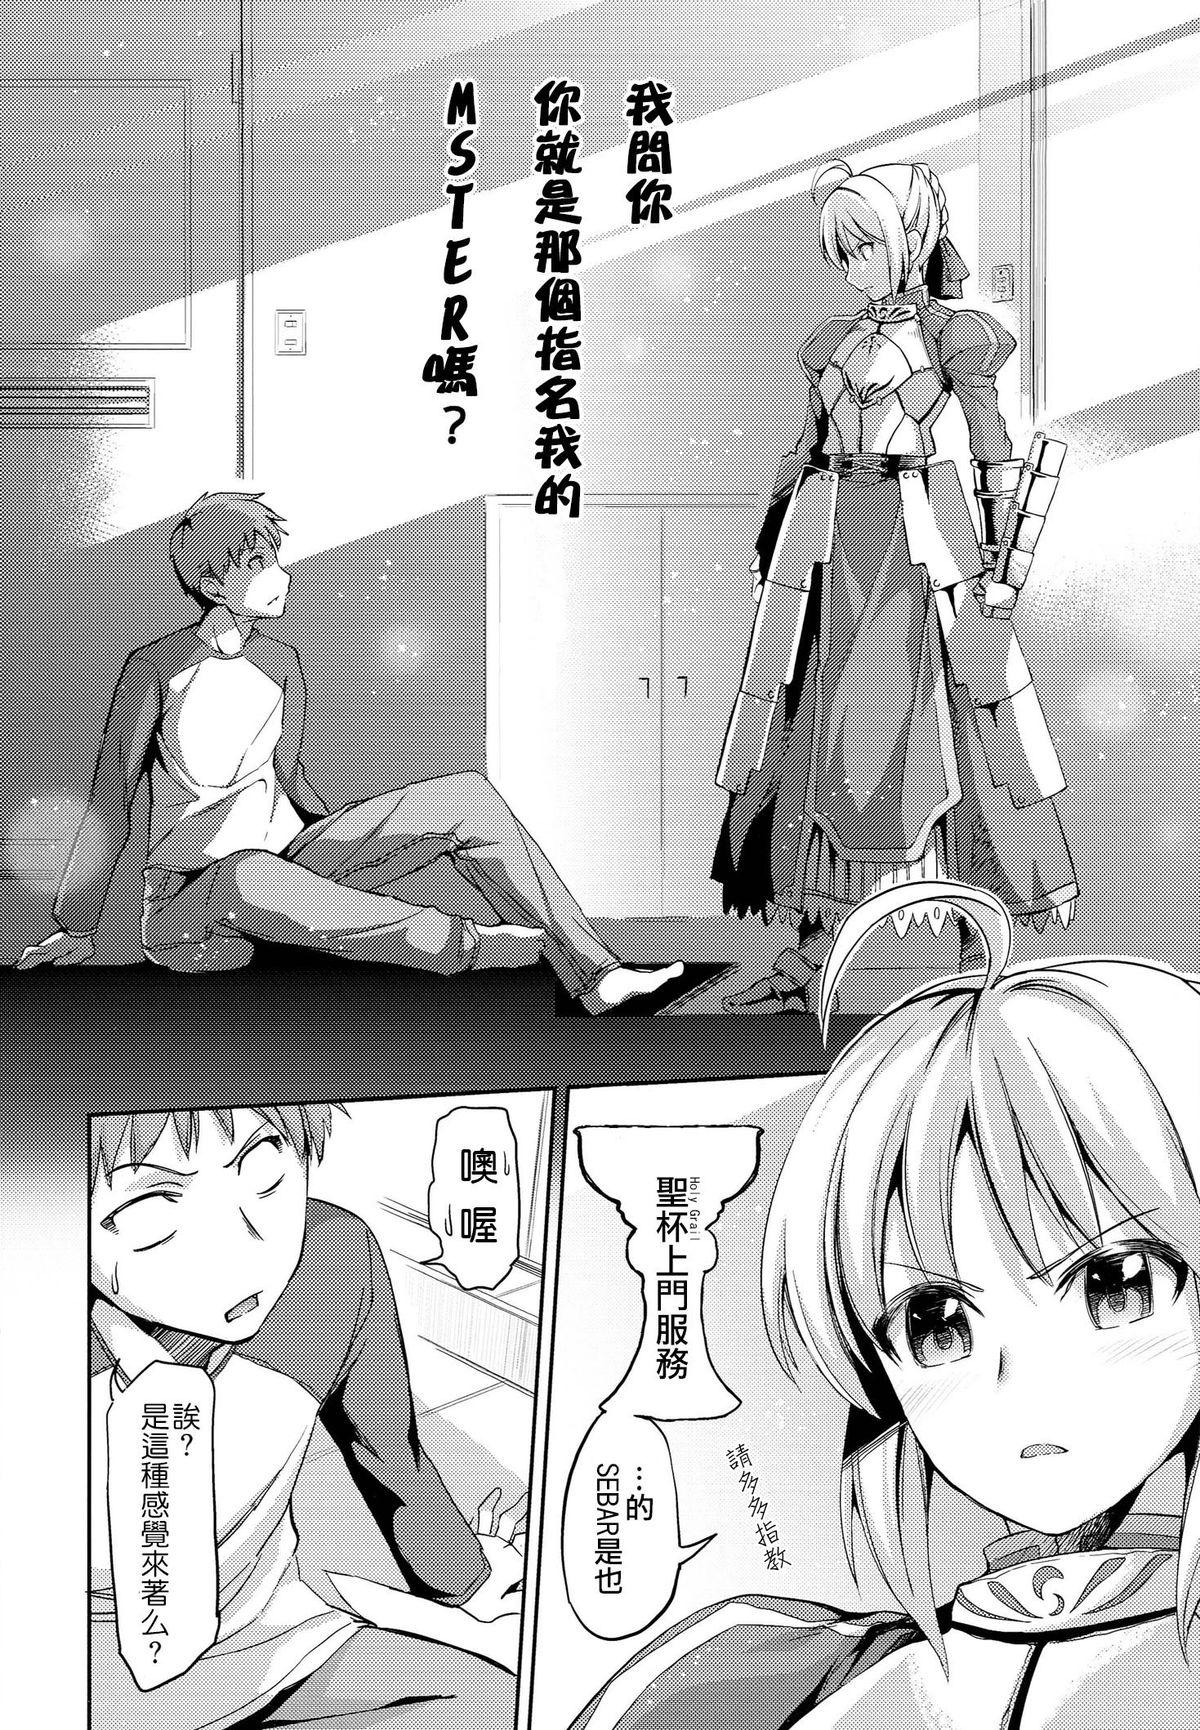 Leite Fate delihell night - Fate stay night Ano - Page 5